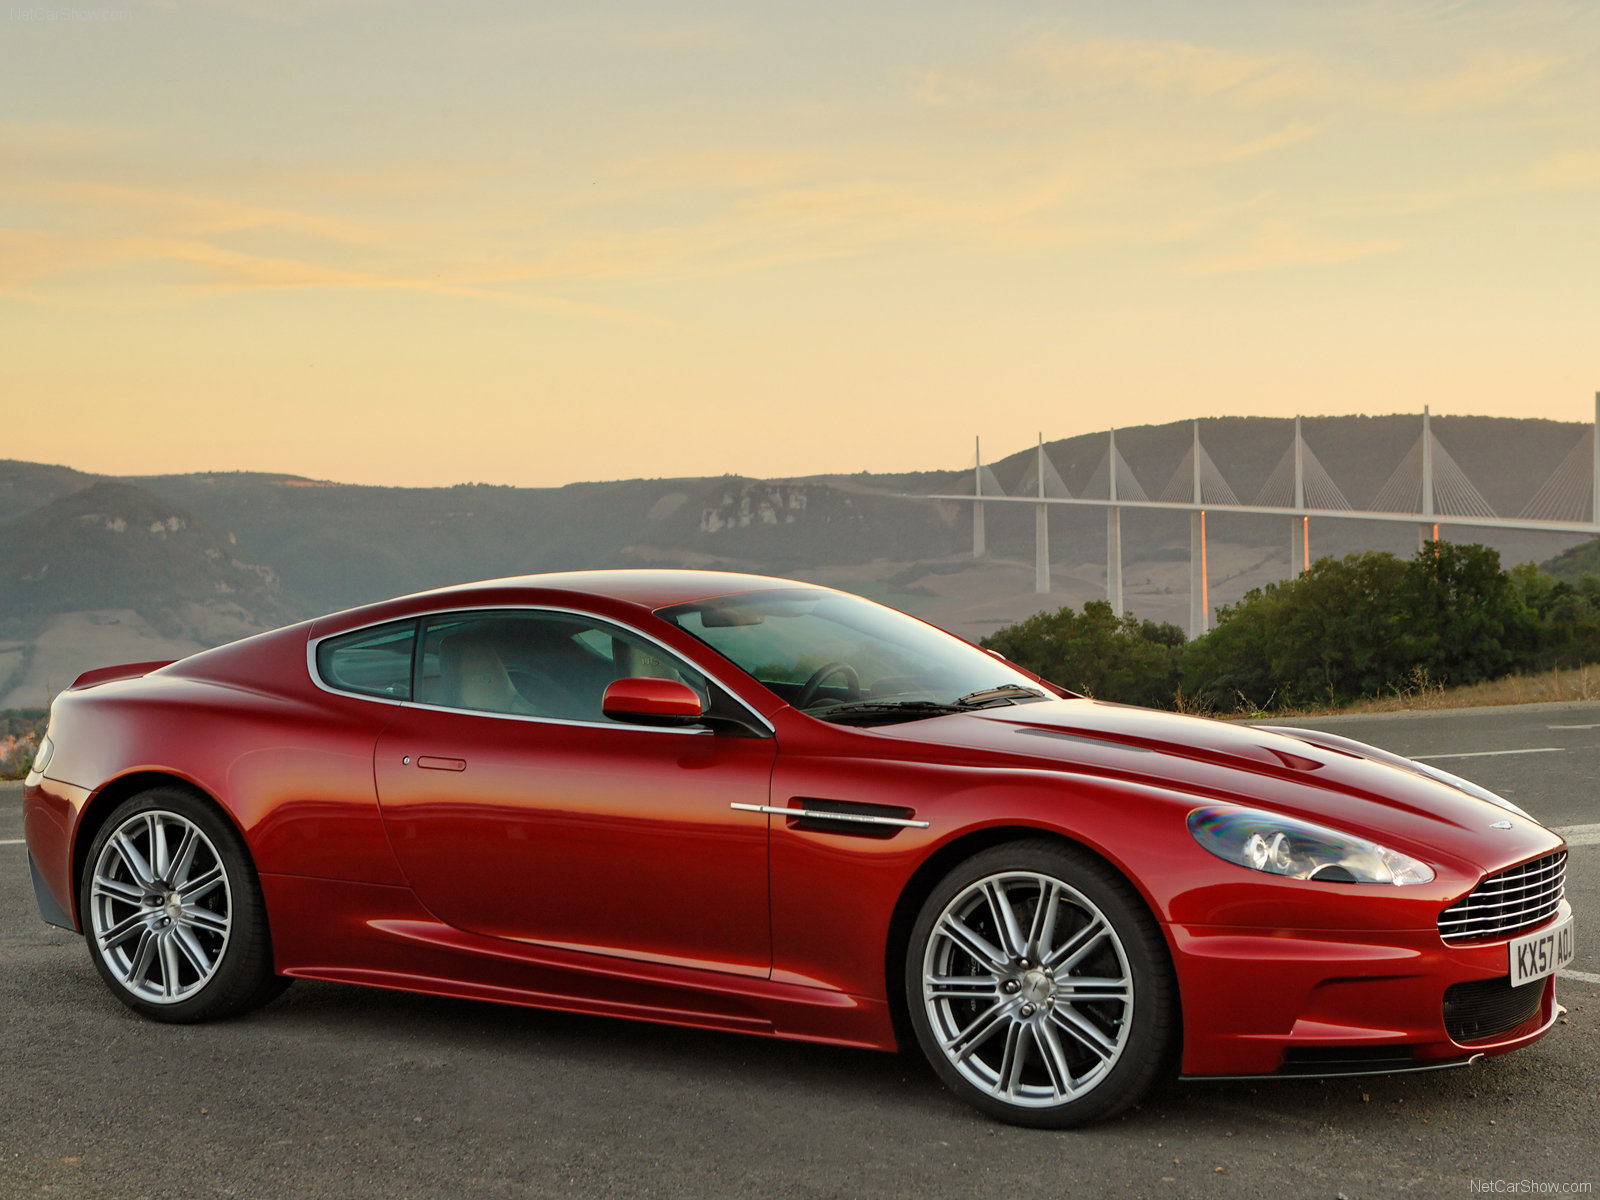 Aston Martin Dbs Infa Red Picture Photo Gallery